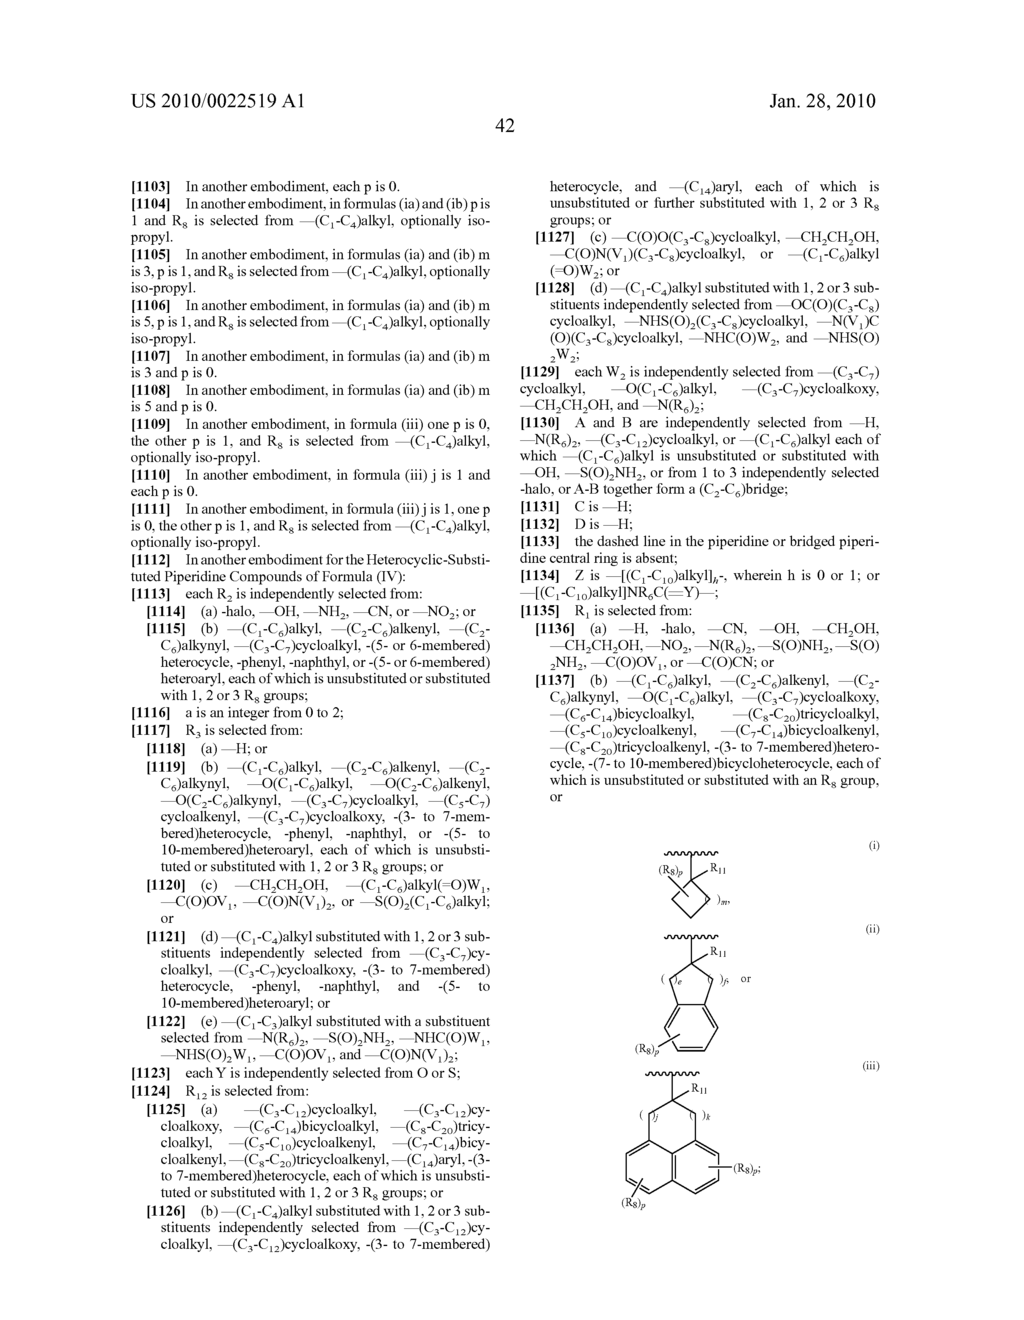 HETEROCYCLIC-SUBSTITUTED PIPERIDINE COMPOUNDS AND THE USES THEREOF - diagram, schematic, and image 43